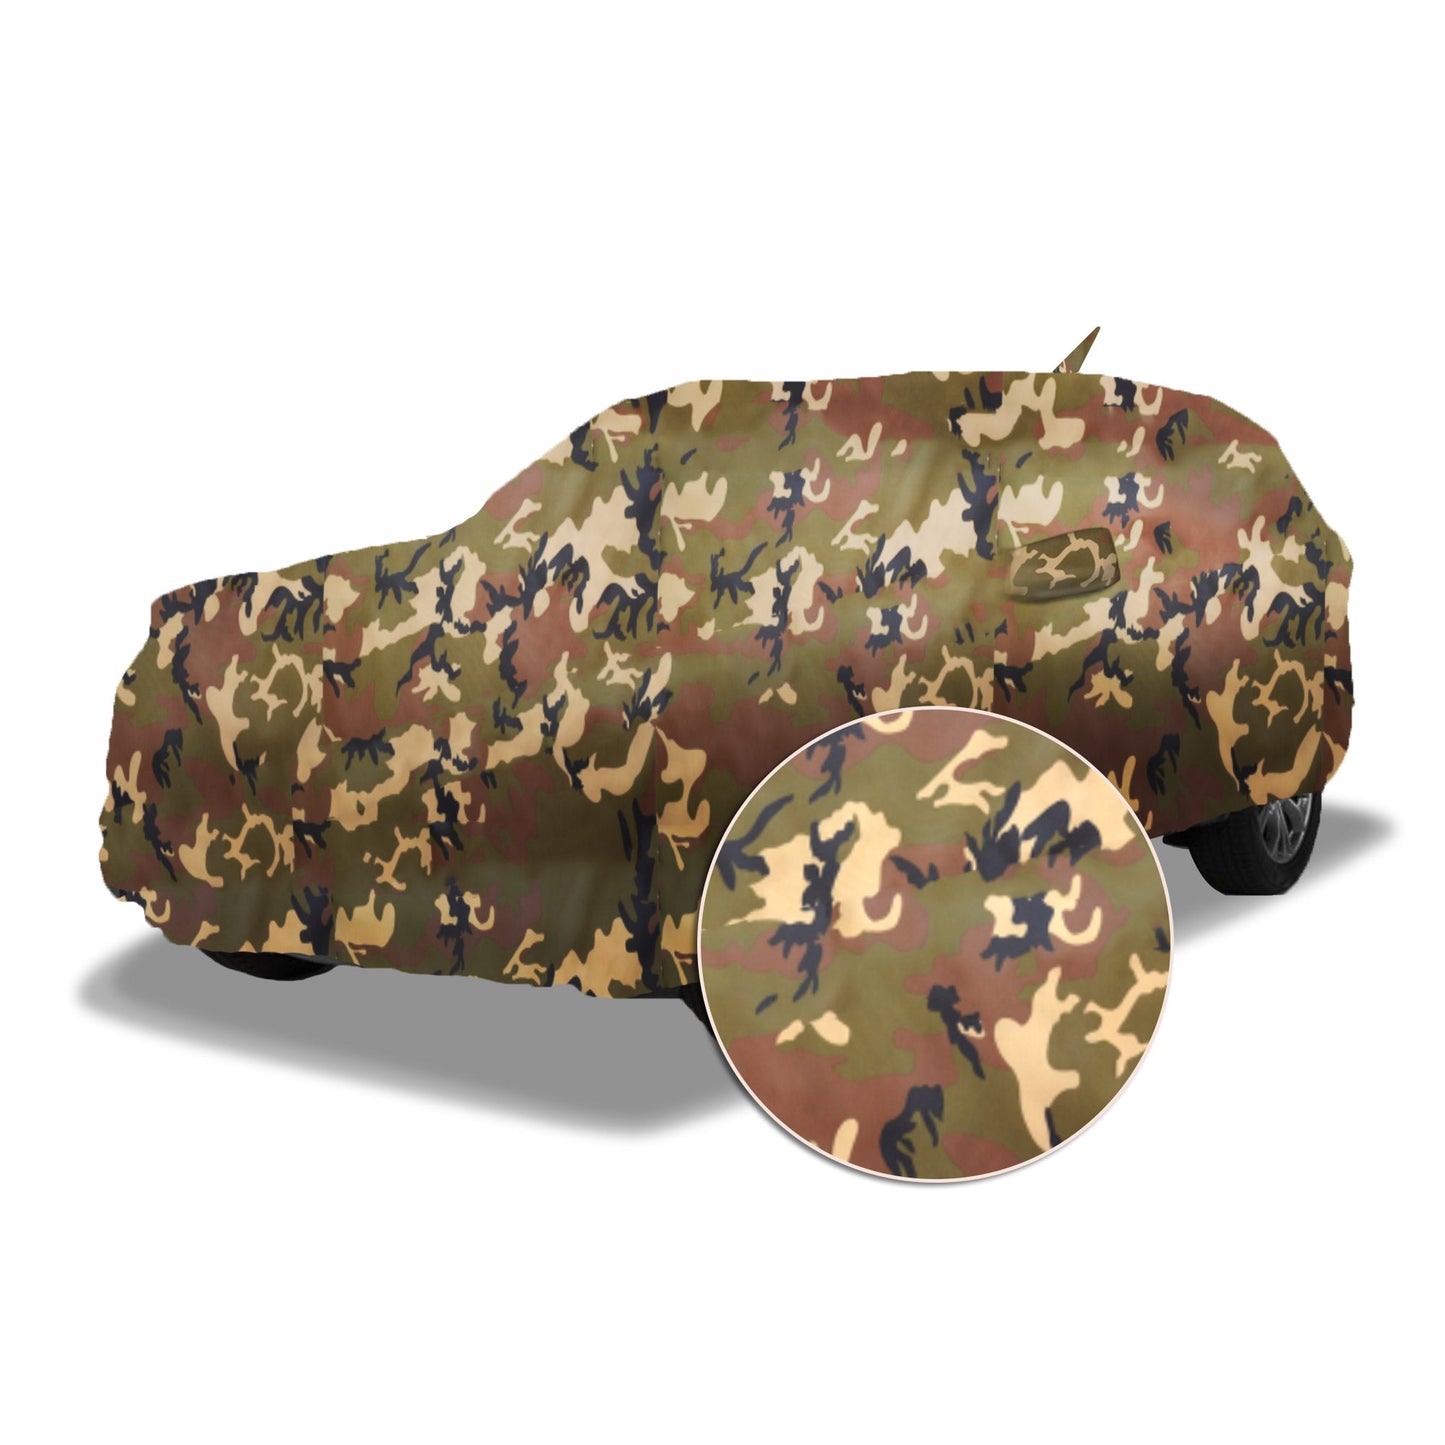 Ascot Volvo XC40 Car Body Cover Extra Strong & Dust Proof Jungle Military Car Cover with UV Proof & Water-Resistant Coating